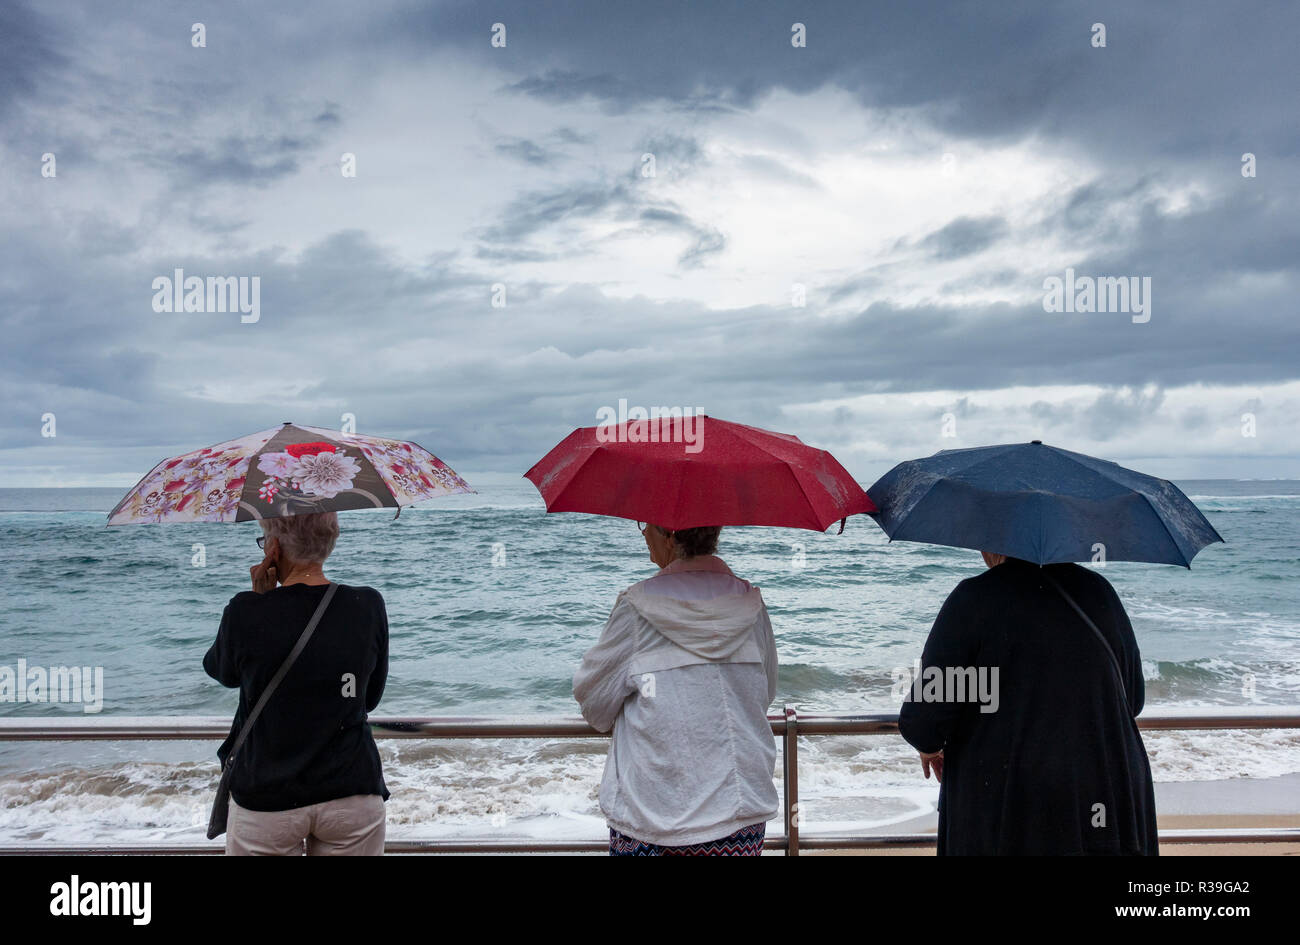 Las Palmas, Gran Canaria, Canary Islands, Spain. 22nd November 2018. Weather:  Holidaymakers hoping to escape the UK icy weather will be disappointed if  they are heading to the Canary Islands, a popular